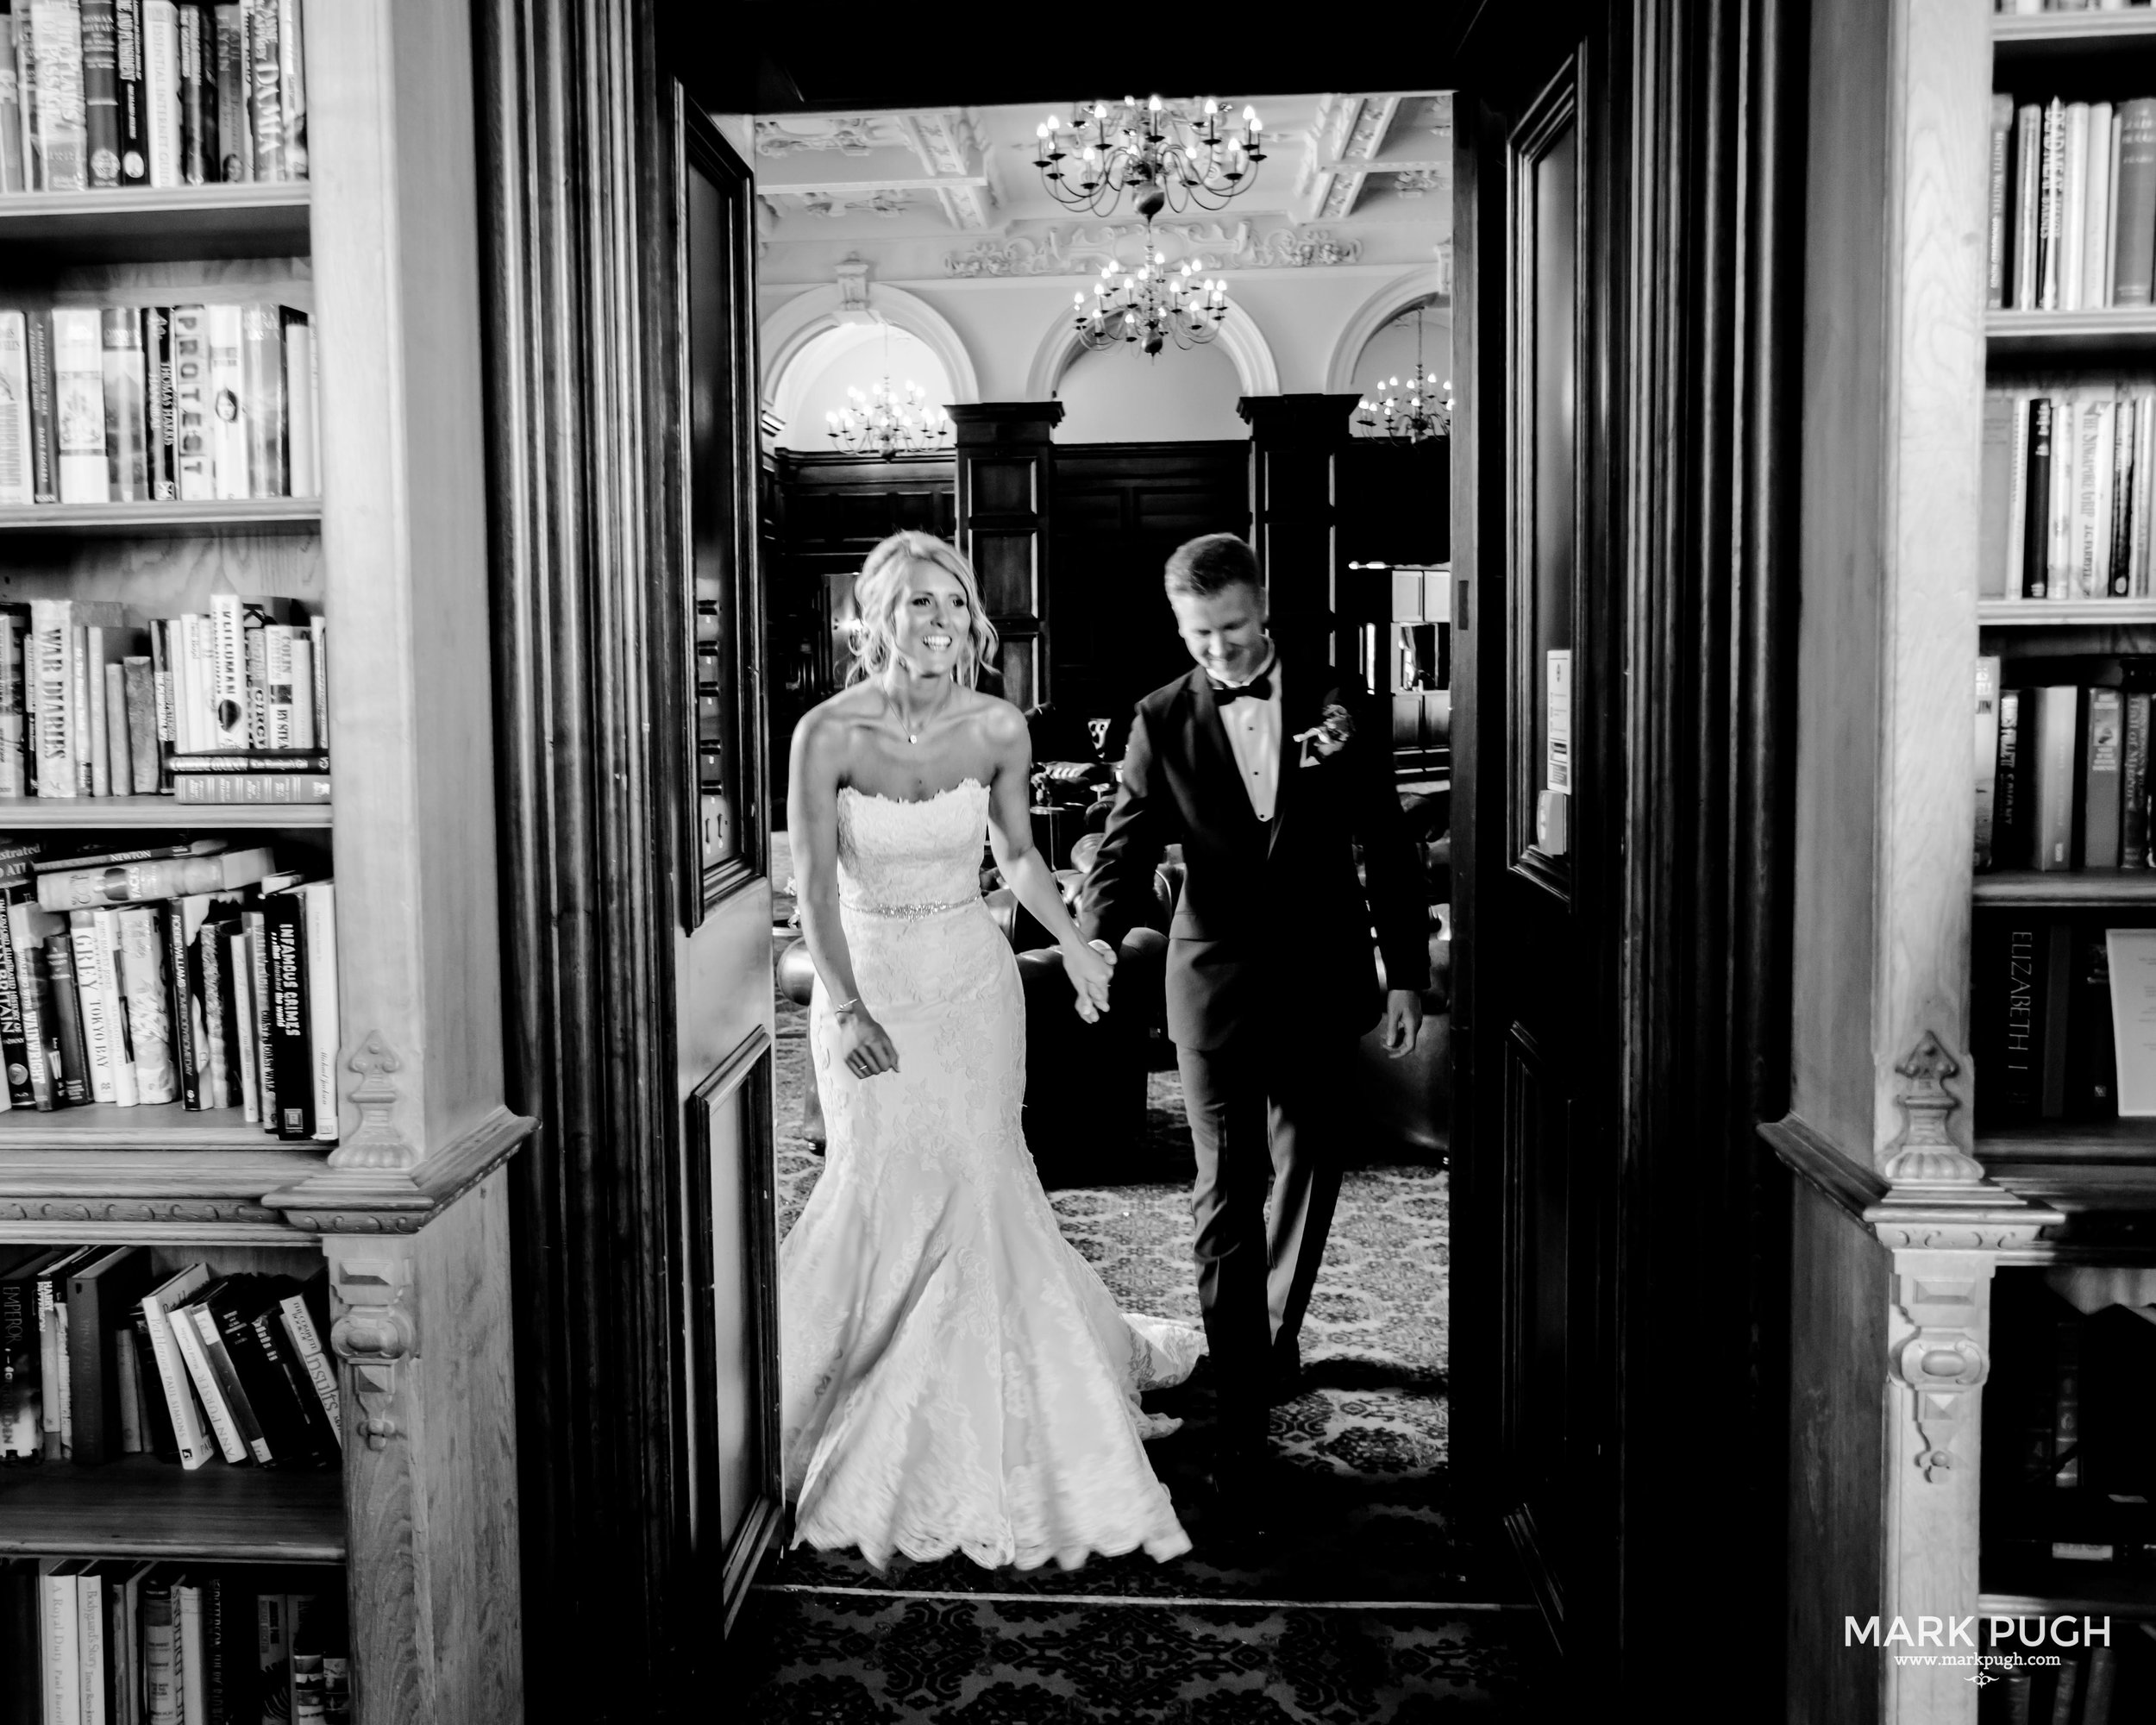 126 - Leah and Andy - fineART wedding photography at Stoke Rochford Hall NG33 5EJ by www.markpugh.com Mark Pugh of www.mpmedia.co.uk_.JPG